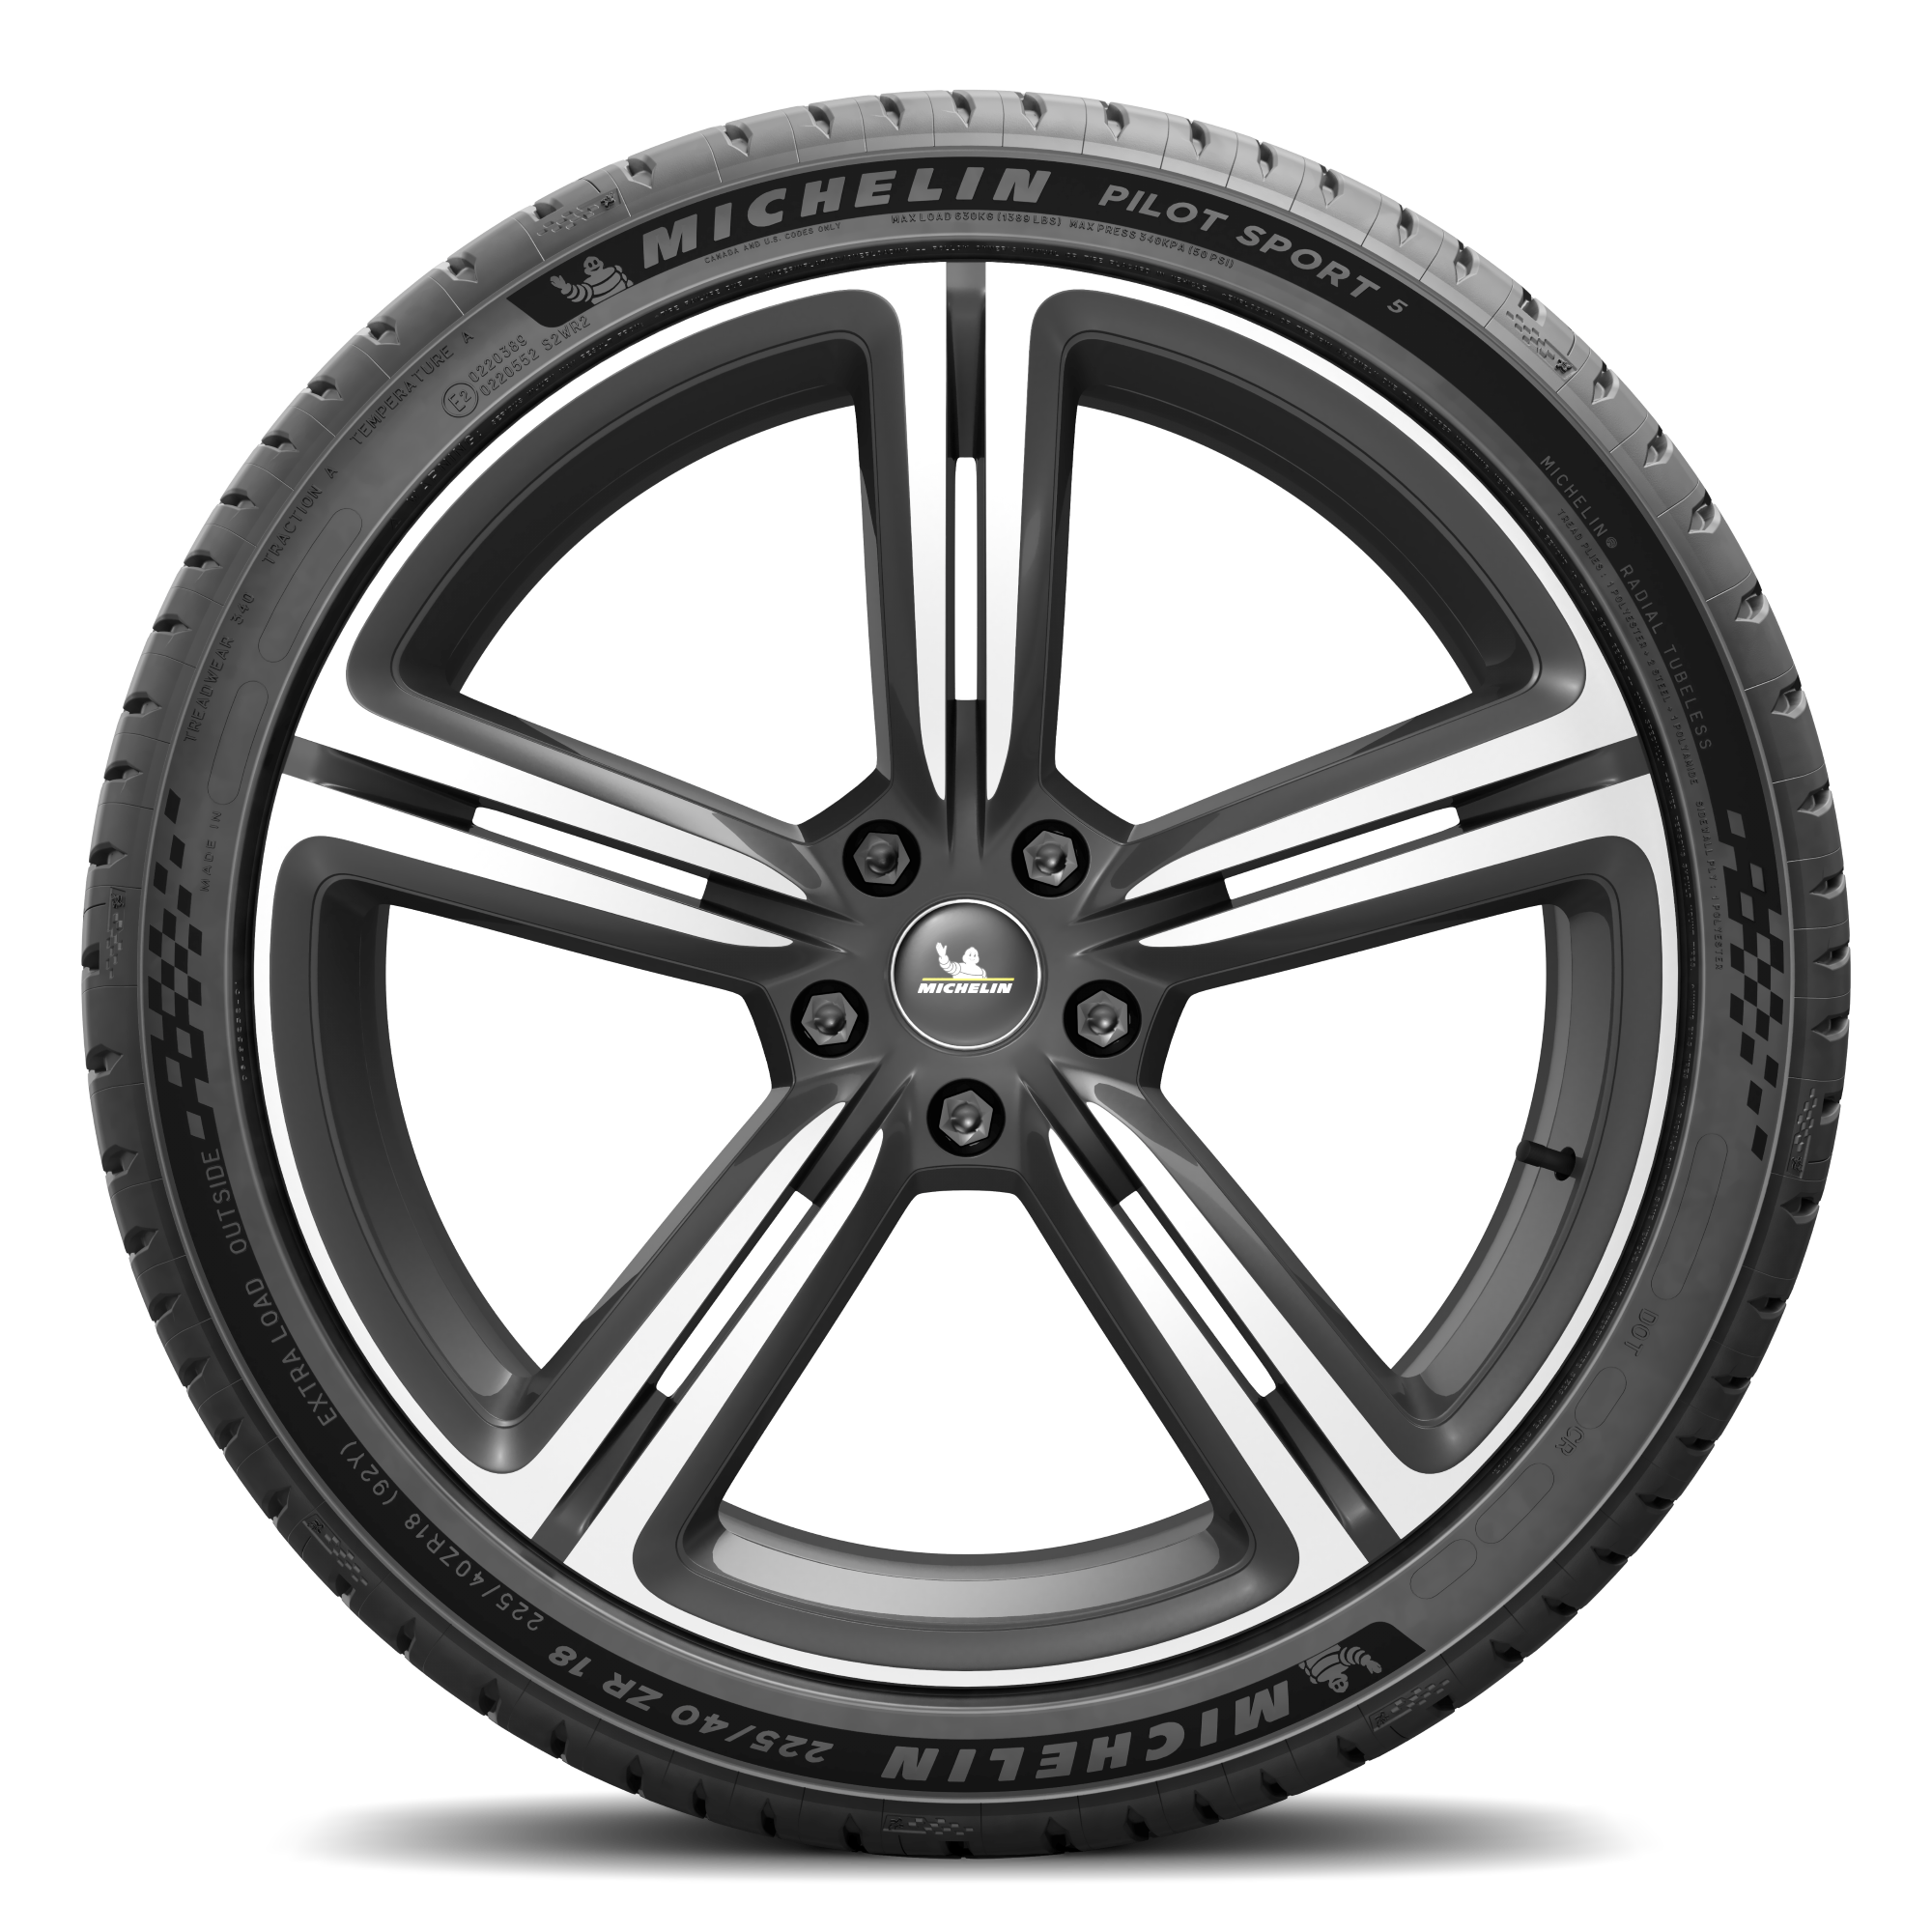 Gasvormig Straat pion What is ACTUALLY new with the Michelin Pilot Sport 5 - Tire Reviews and  Tests